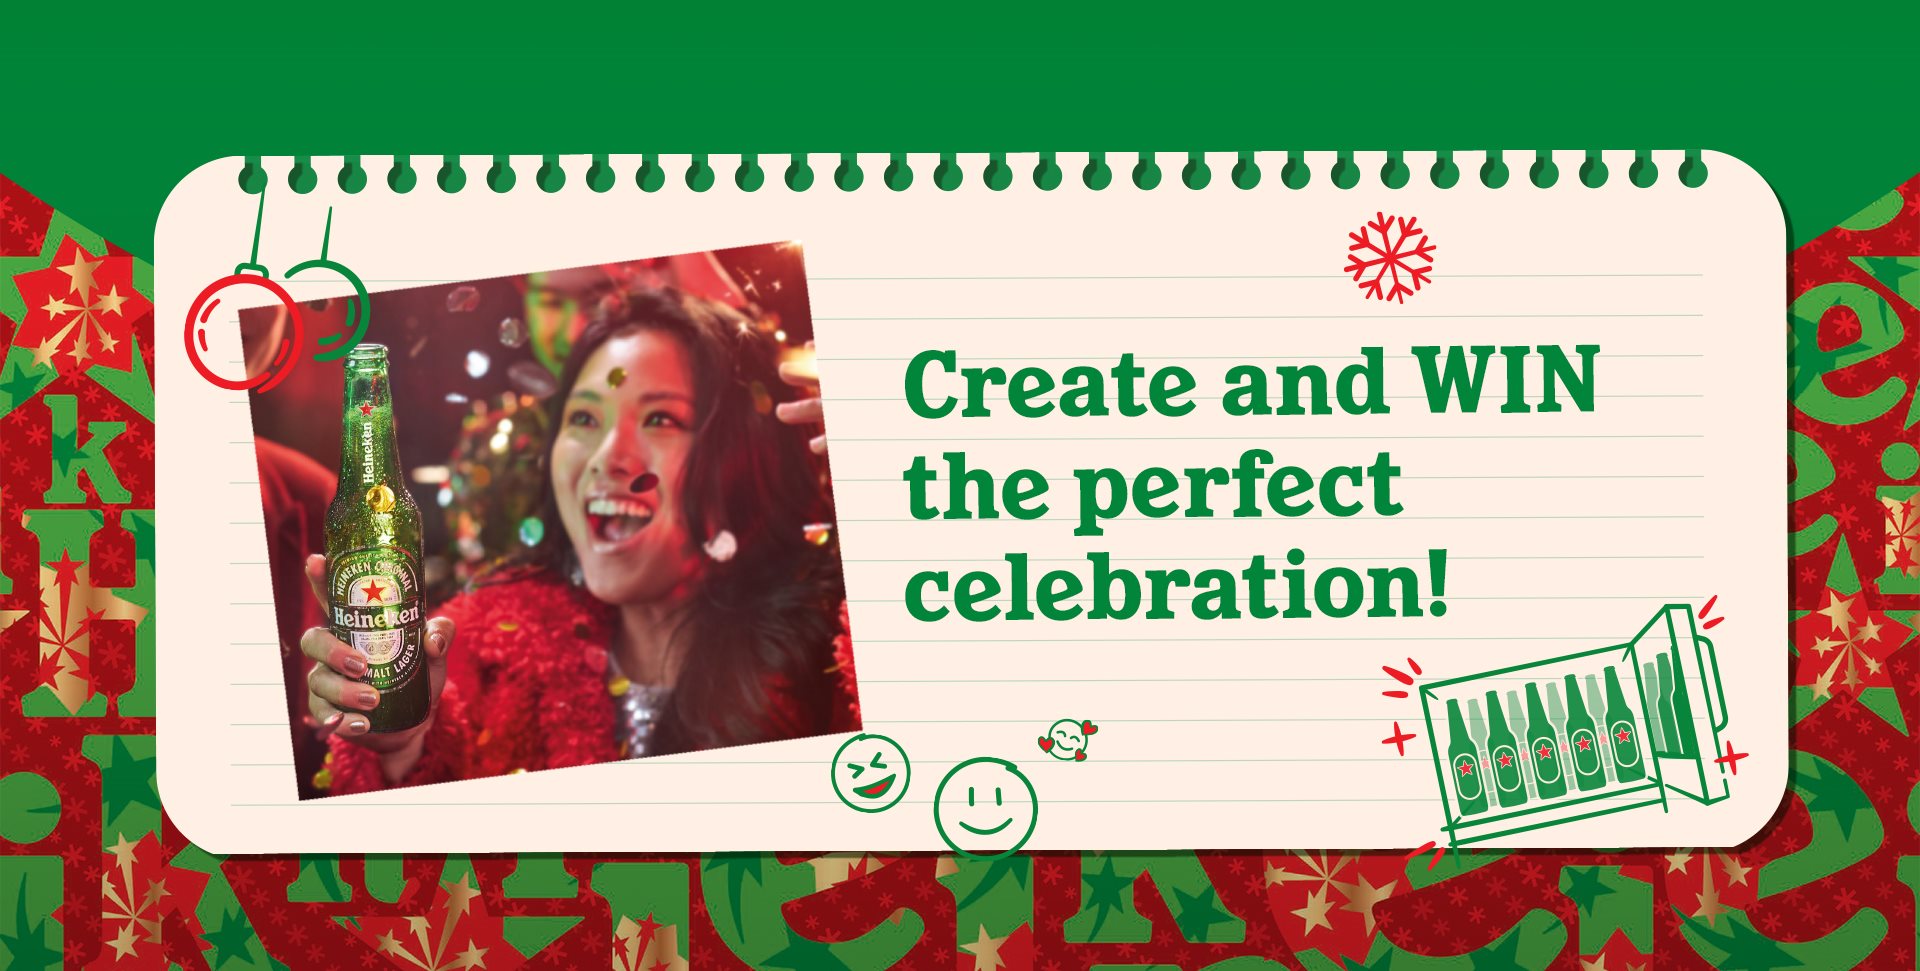 Create and WIN your Perferct Celebration!